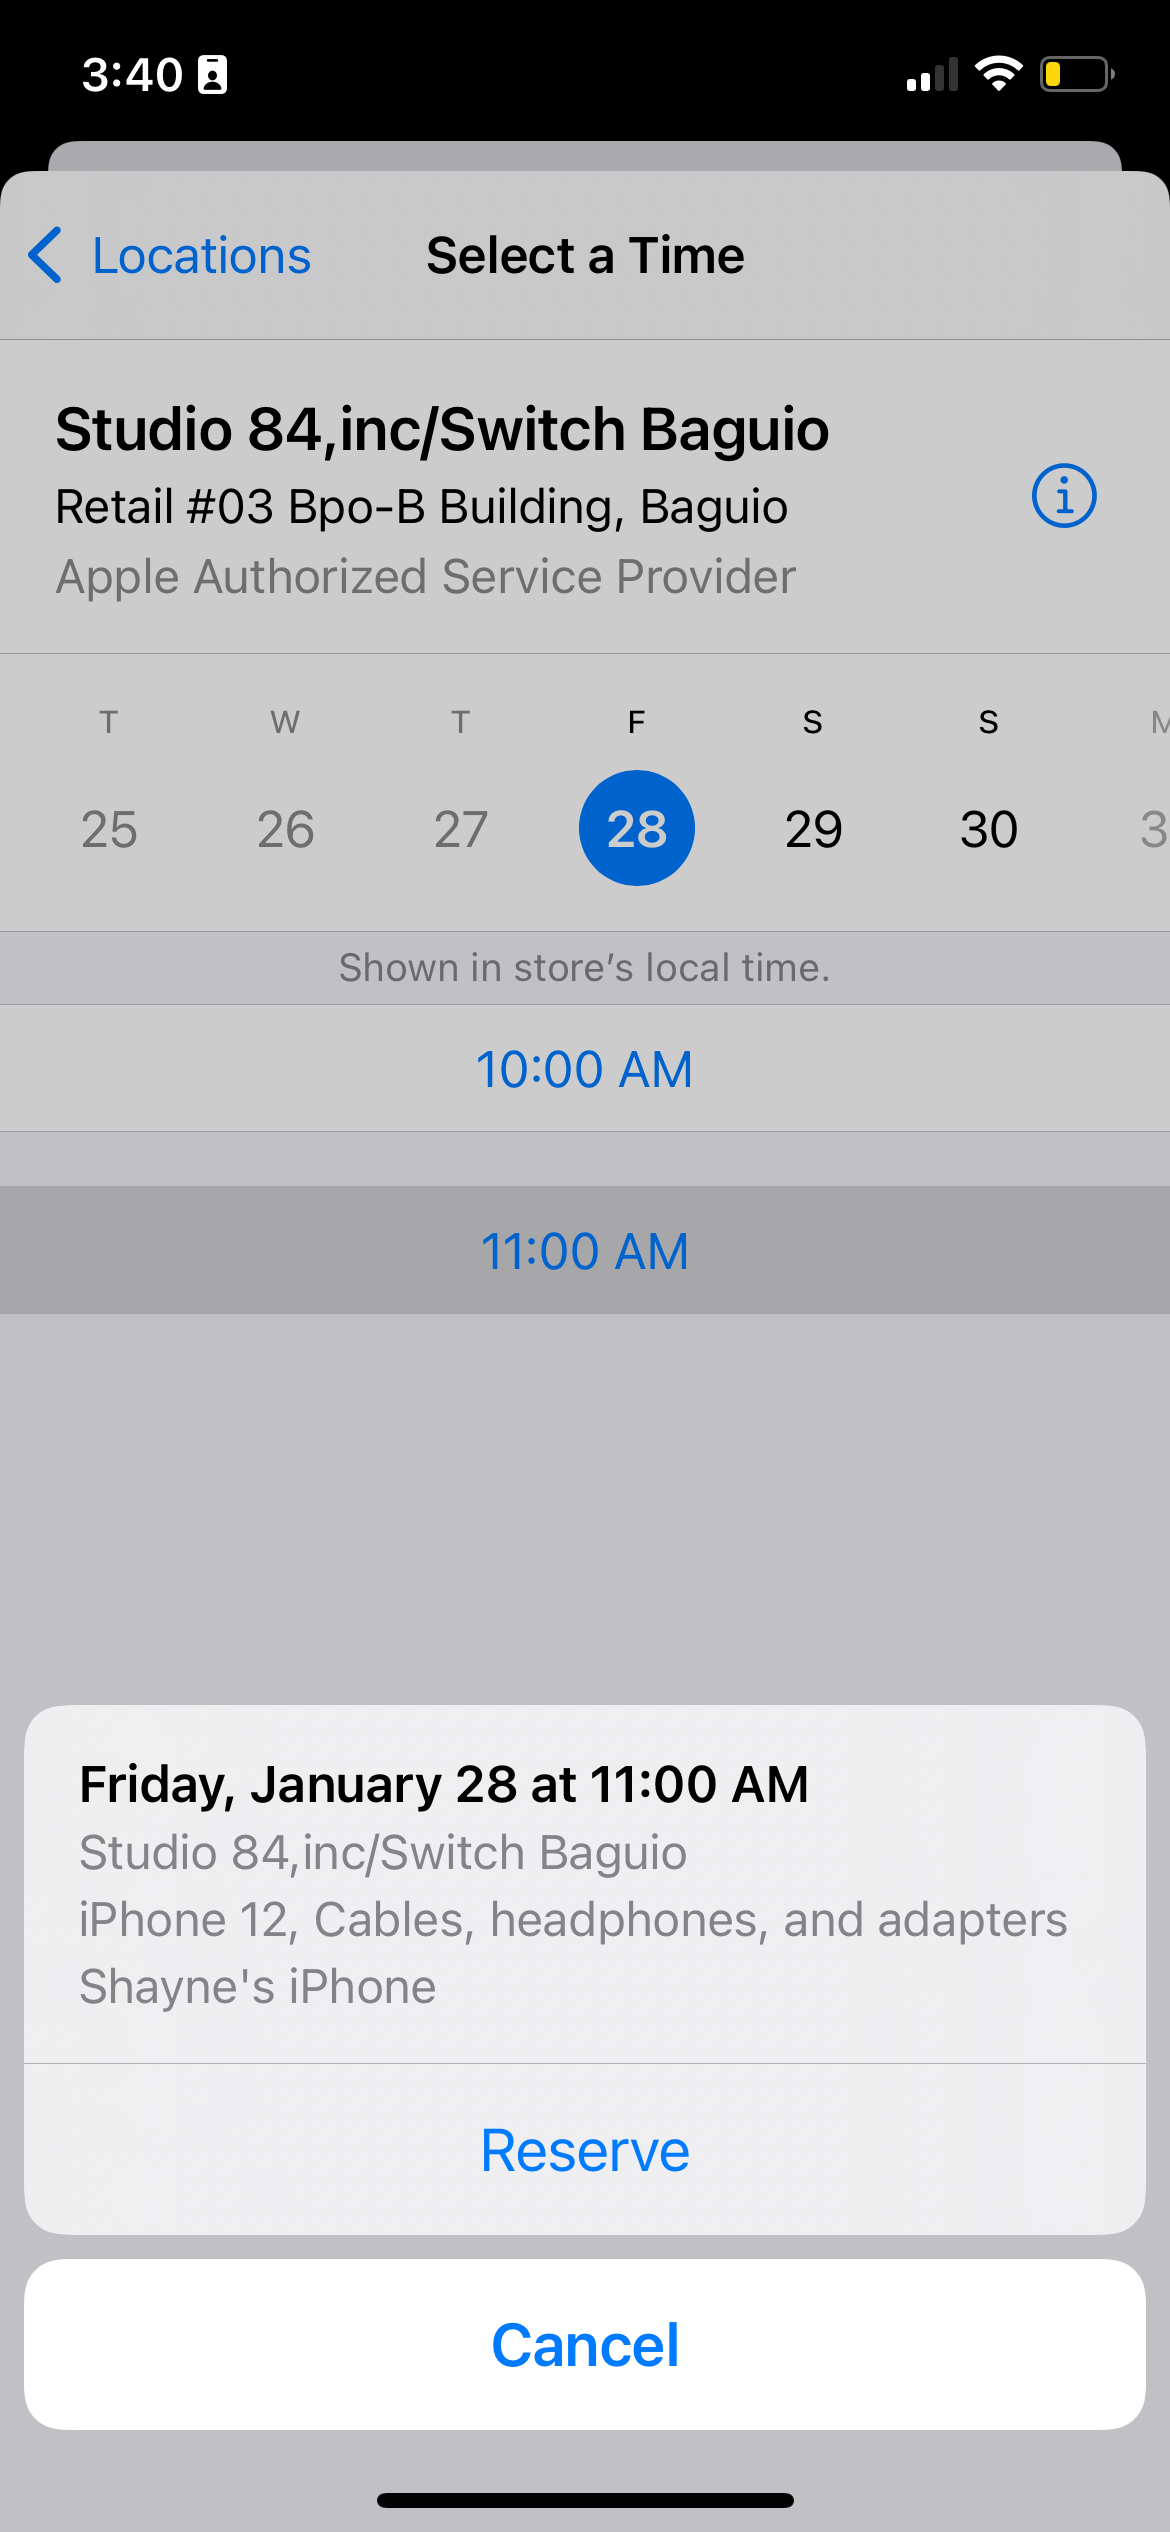 Reserve Button to Schedule a Repair Through Apple Support App